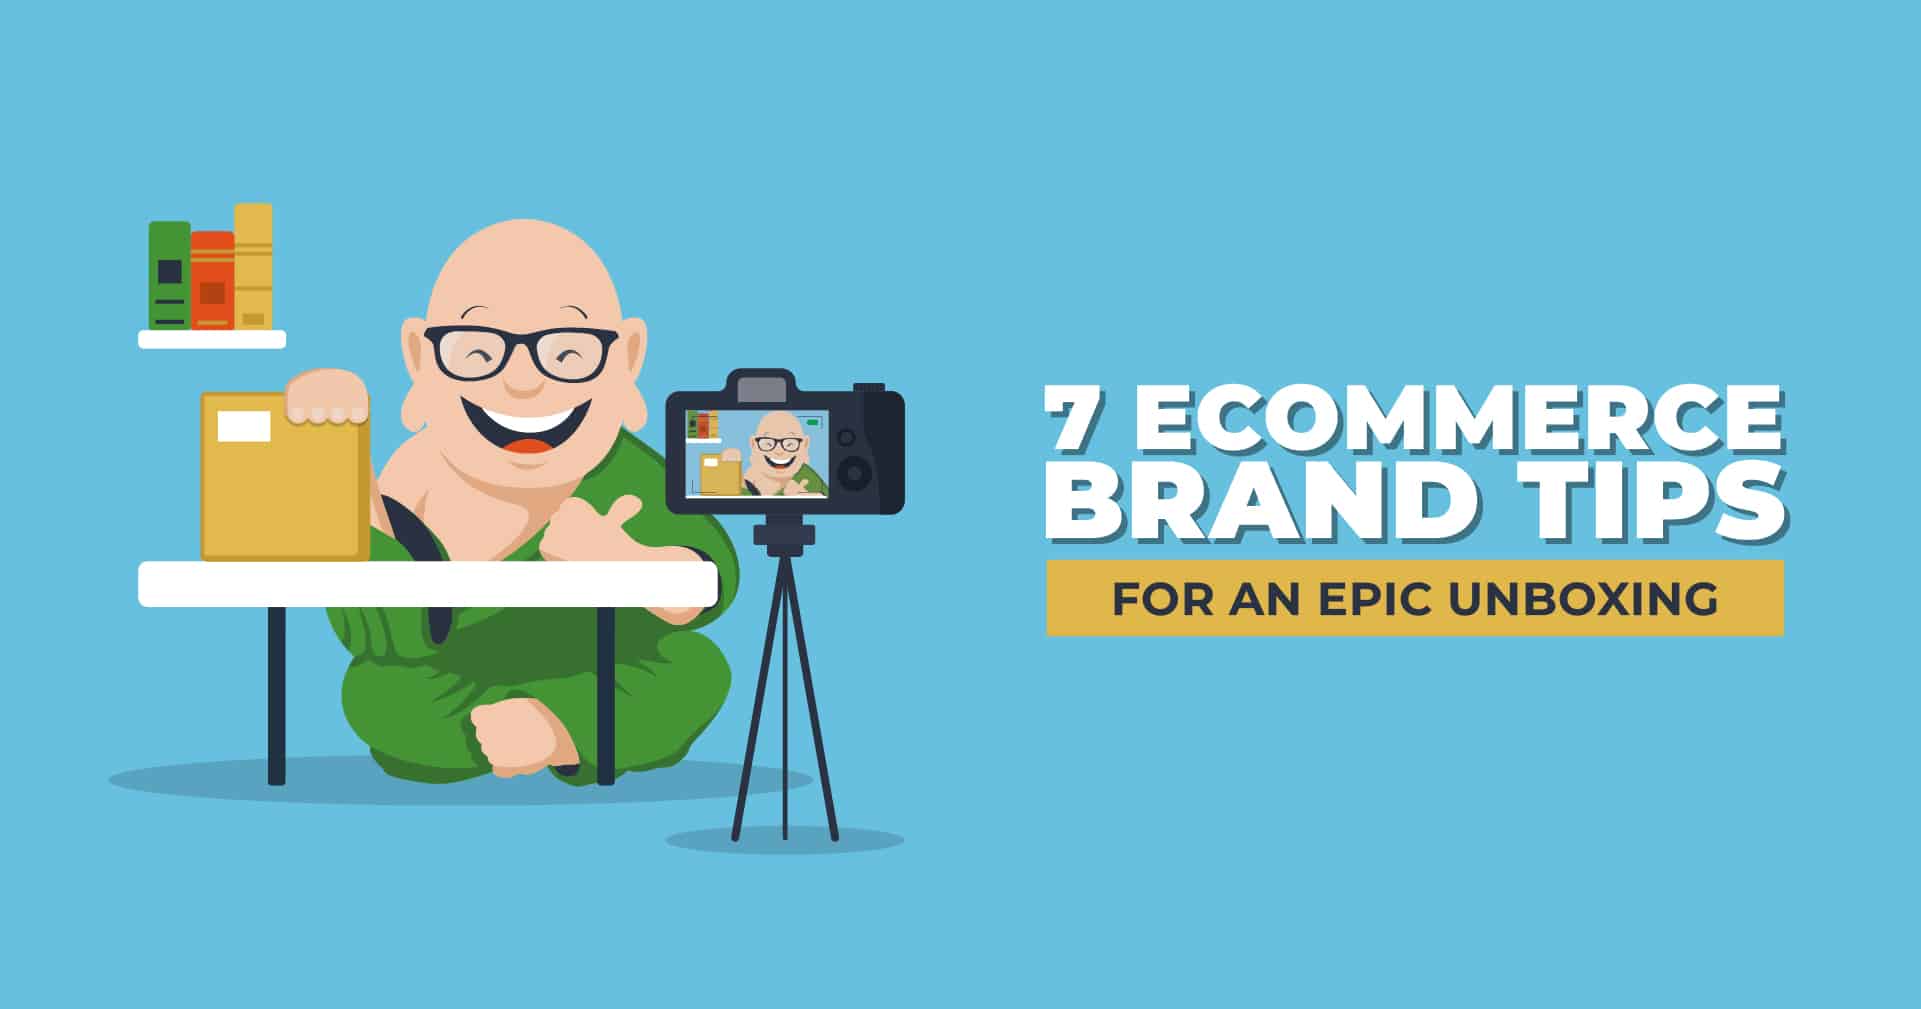 7 Ecommerce Brand Tips for an Epic Unboxing